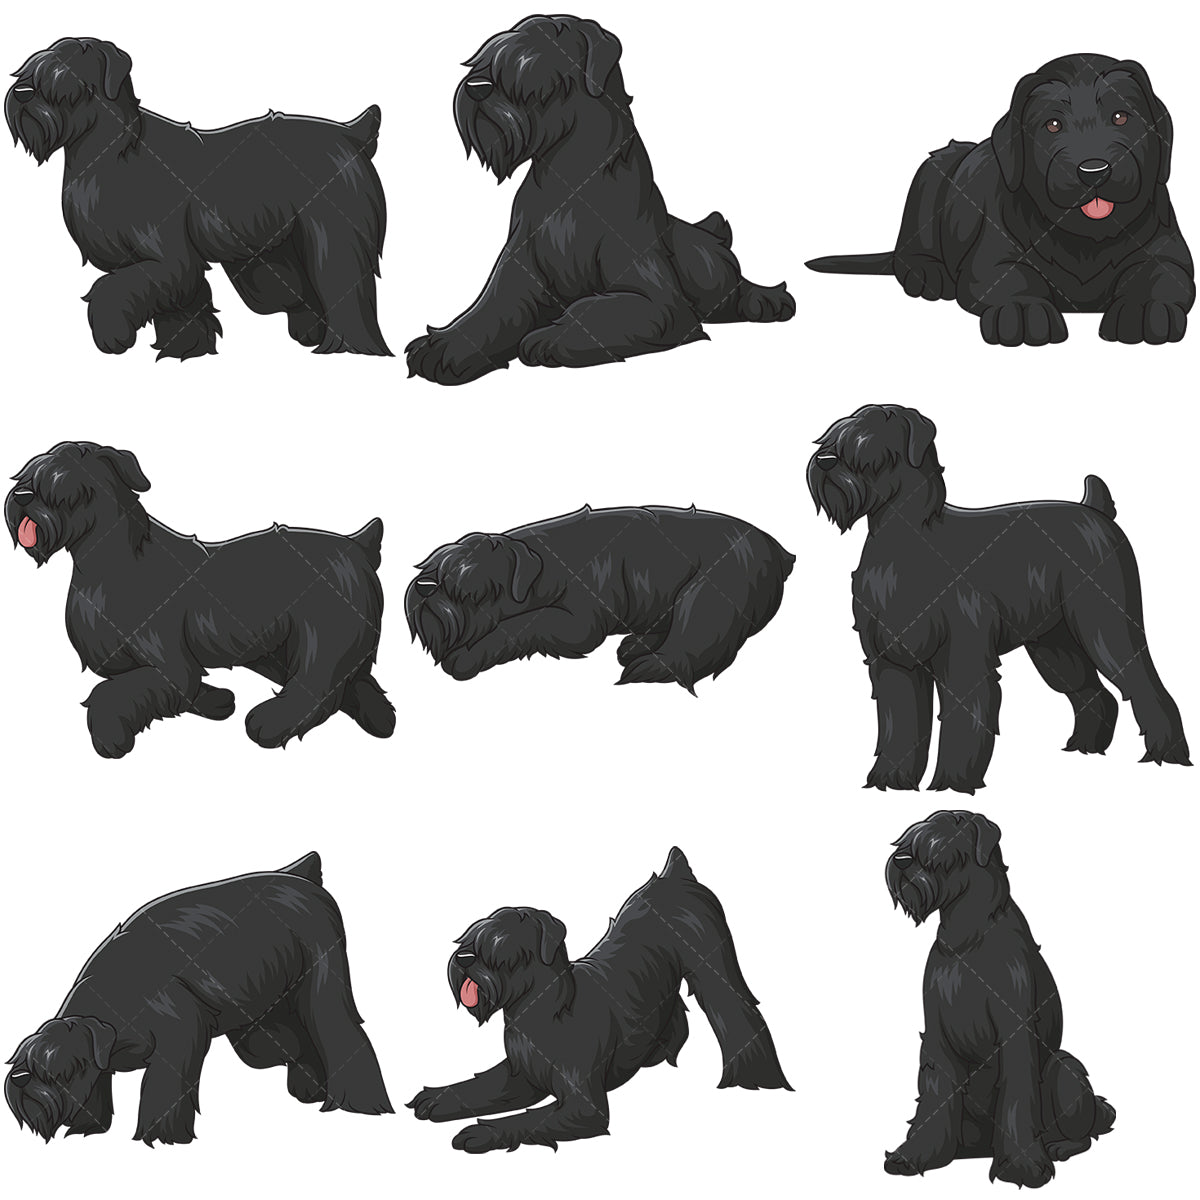 A bundle of 9 royalty-free stock vector illustrations of black russian terrier dogs.